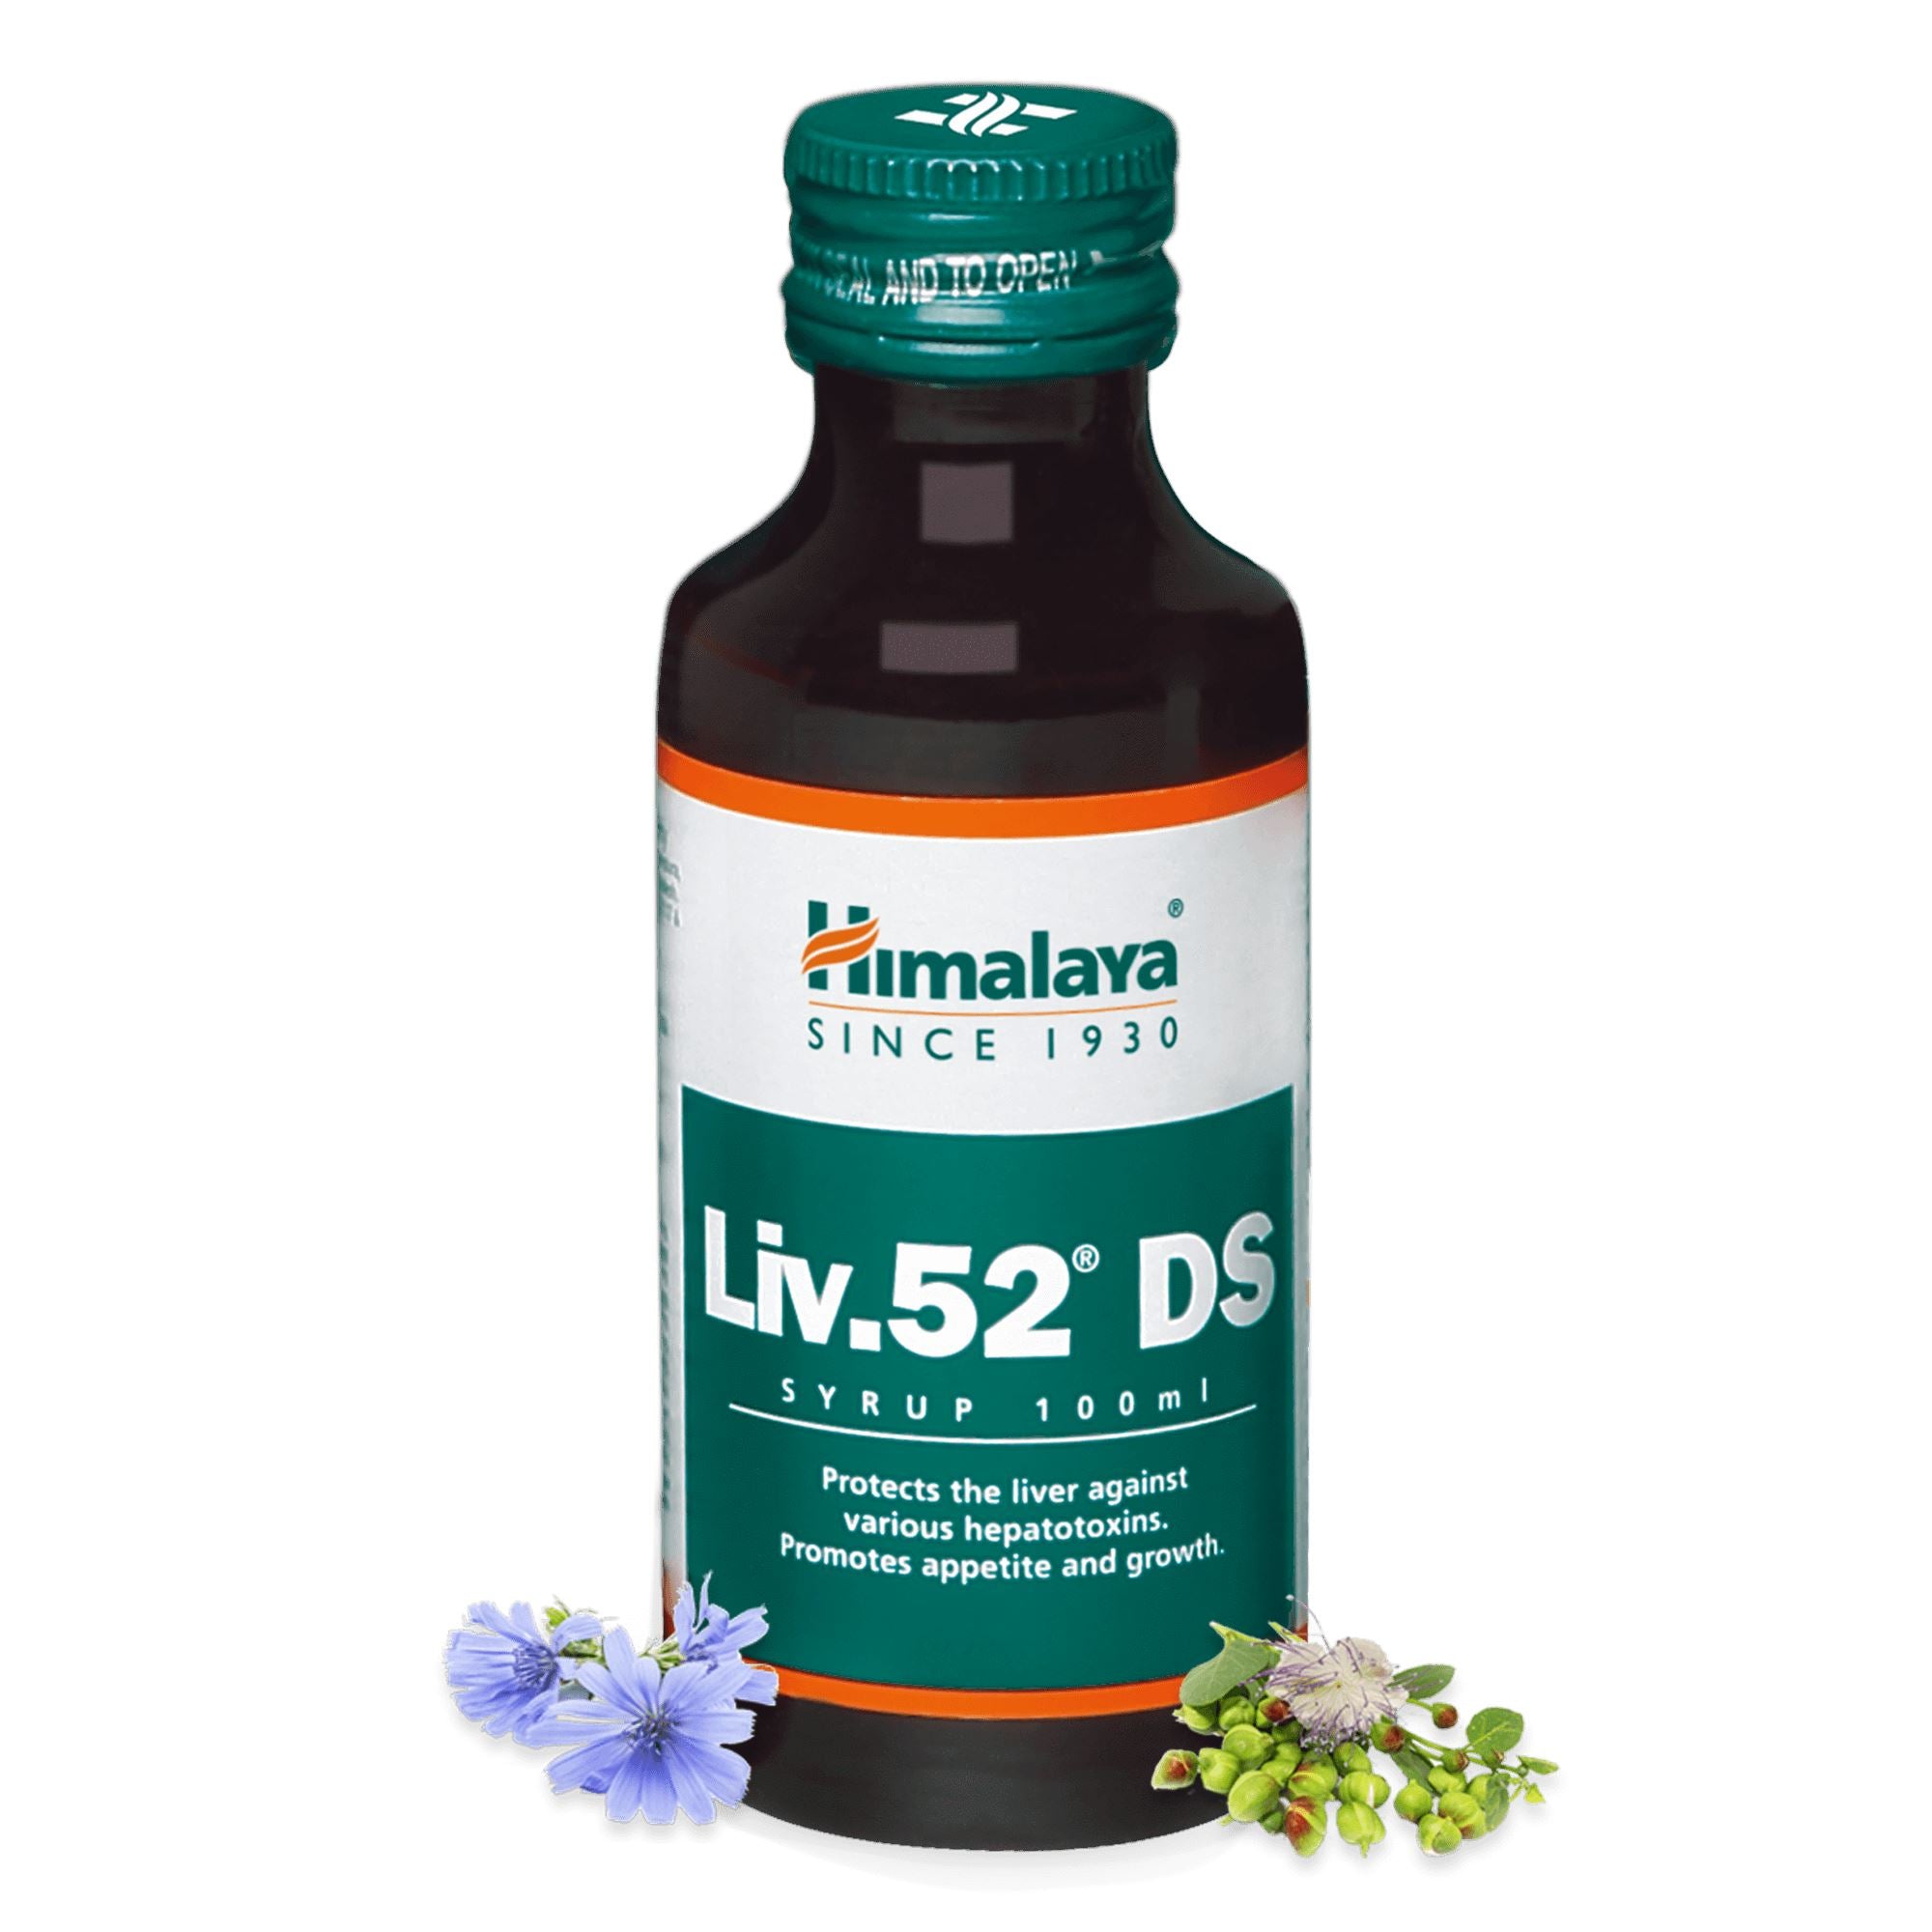 Himalaya Liv.52 DS Syrup - Protects the liver when taking liver-toxic medicine or alcohol